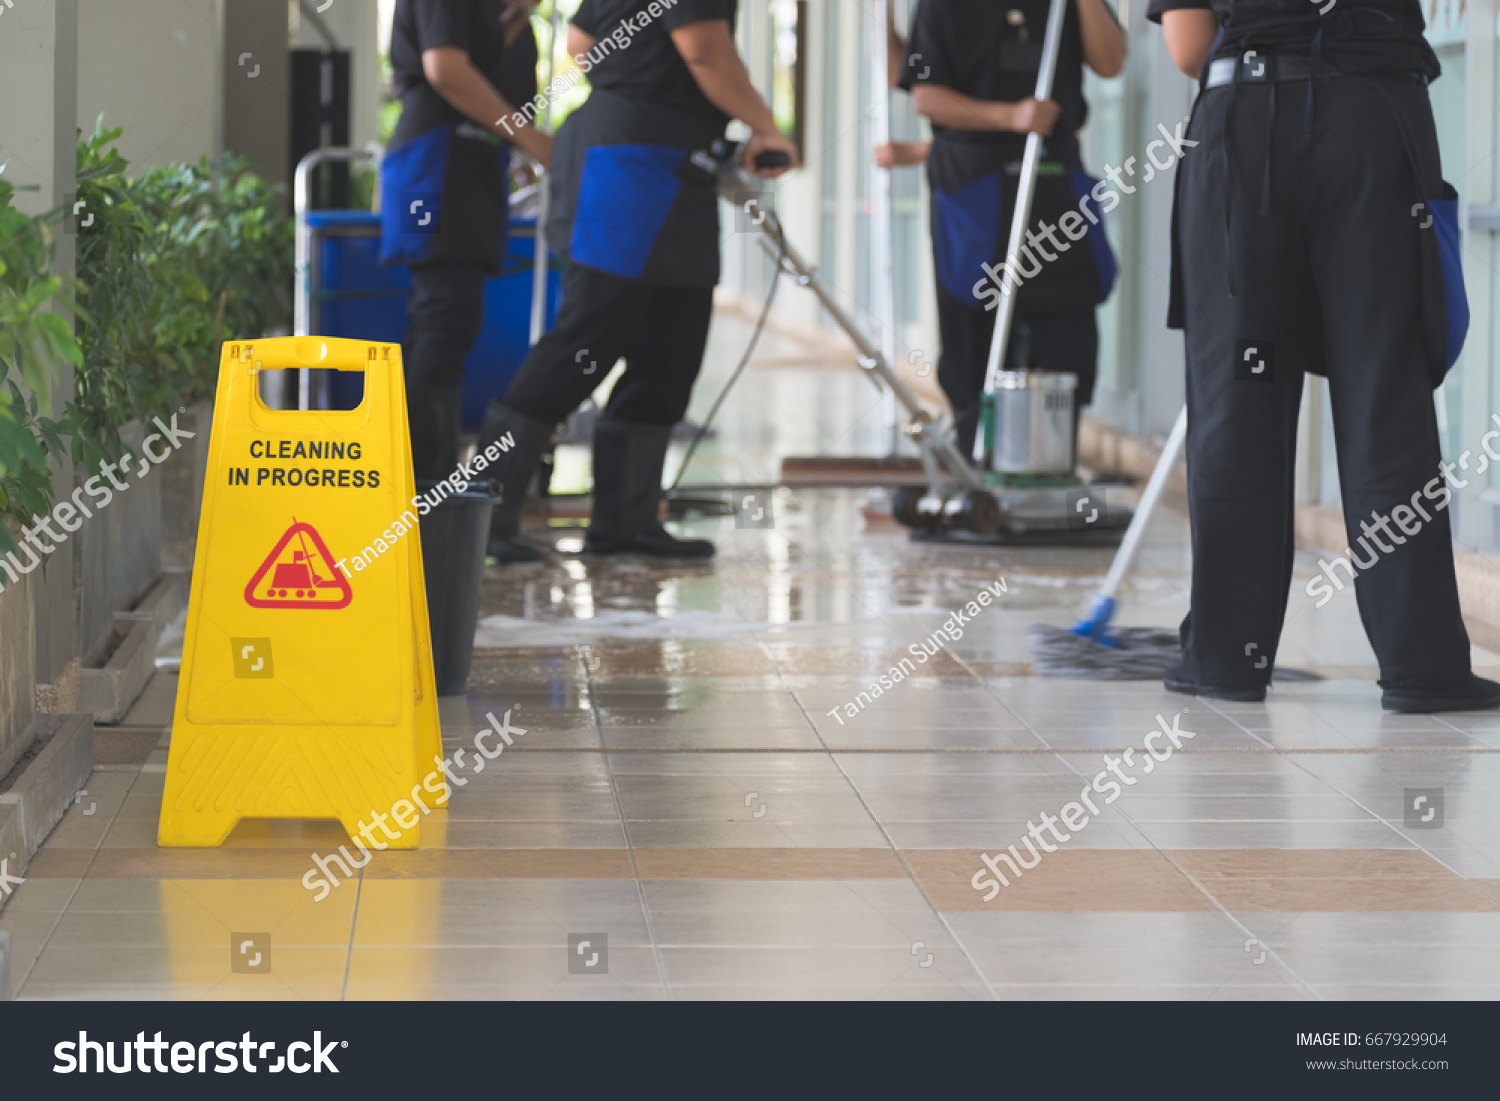 Cropped image of group of woman in protective gloves using a flat wet-mop and machine while cleaning floor #667929904